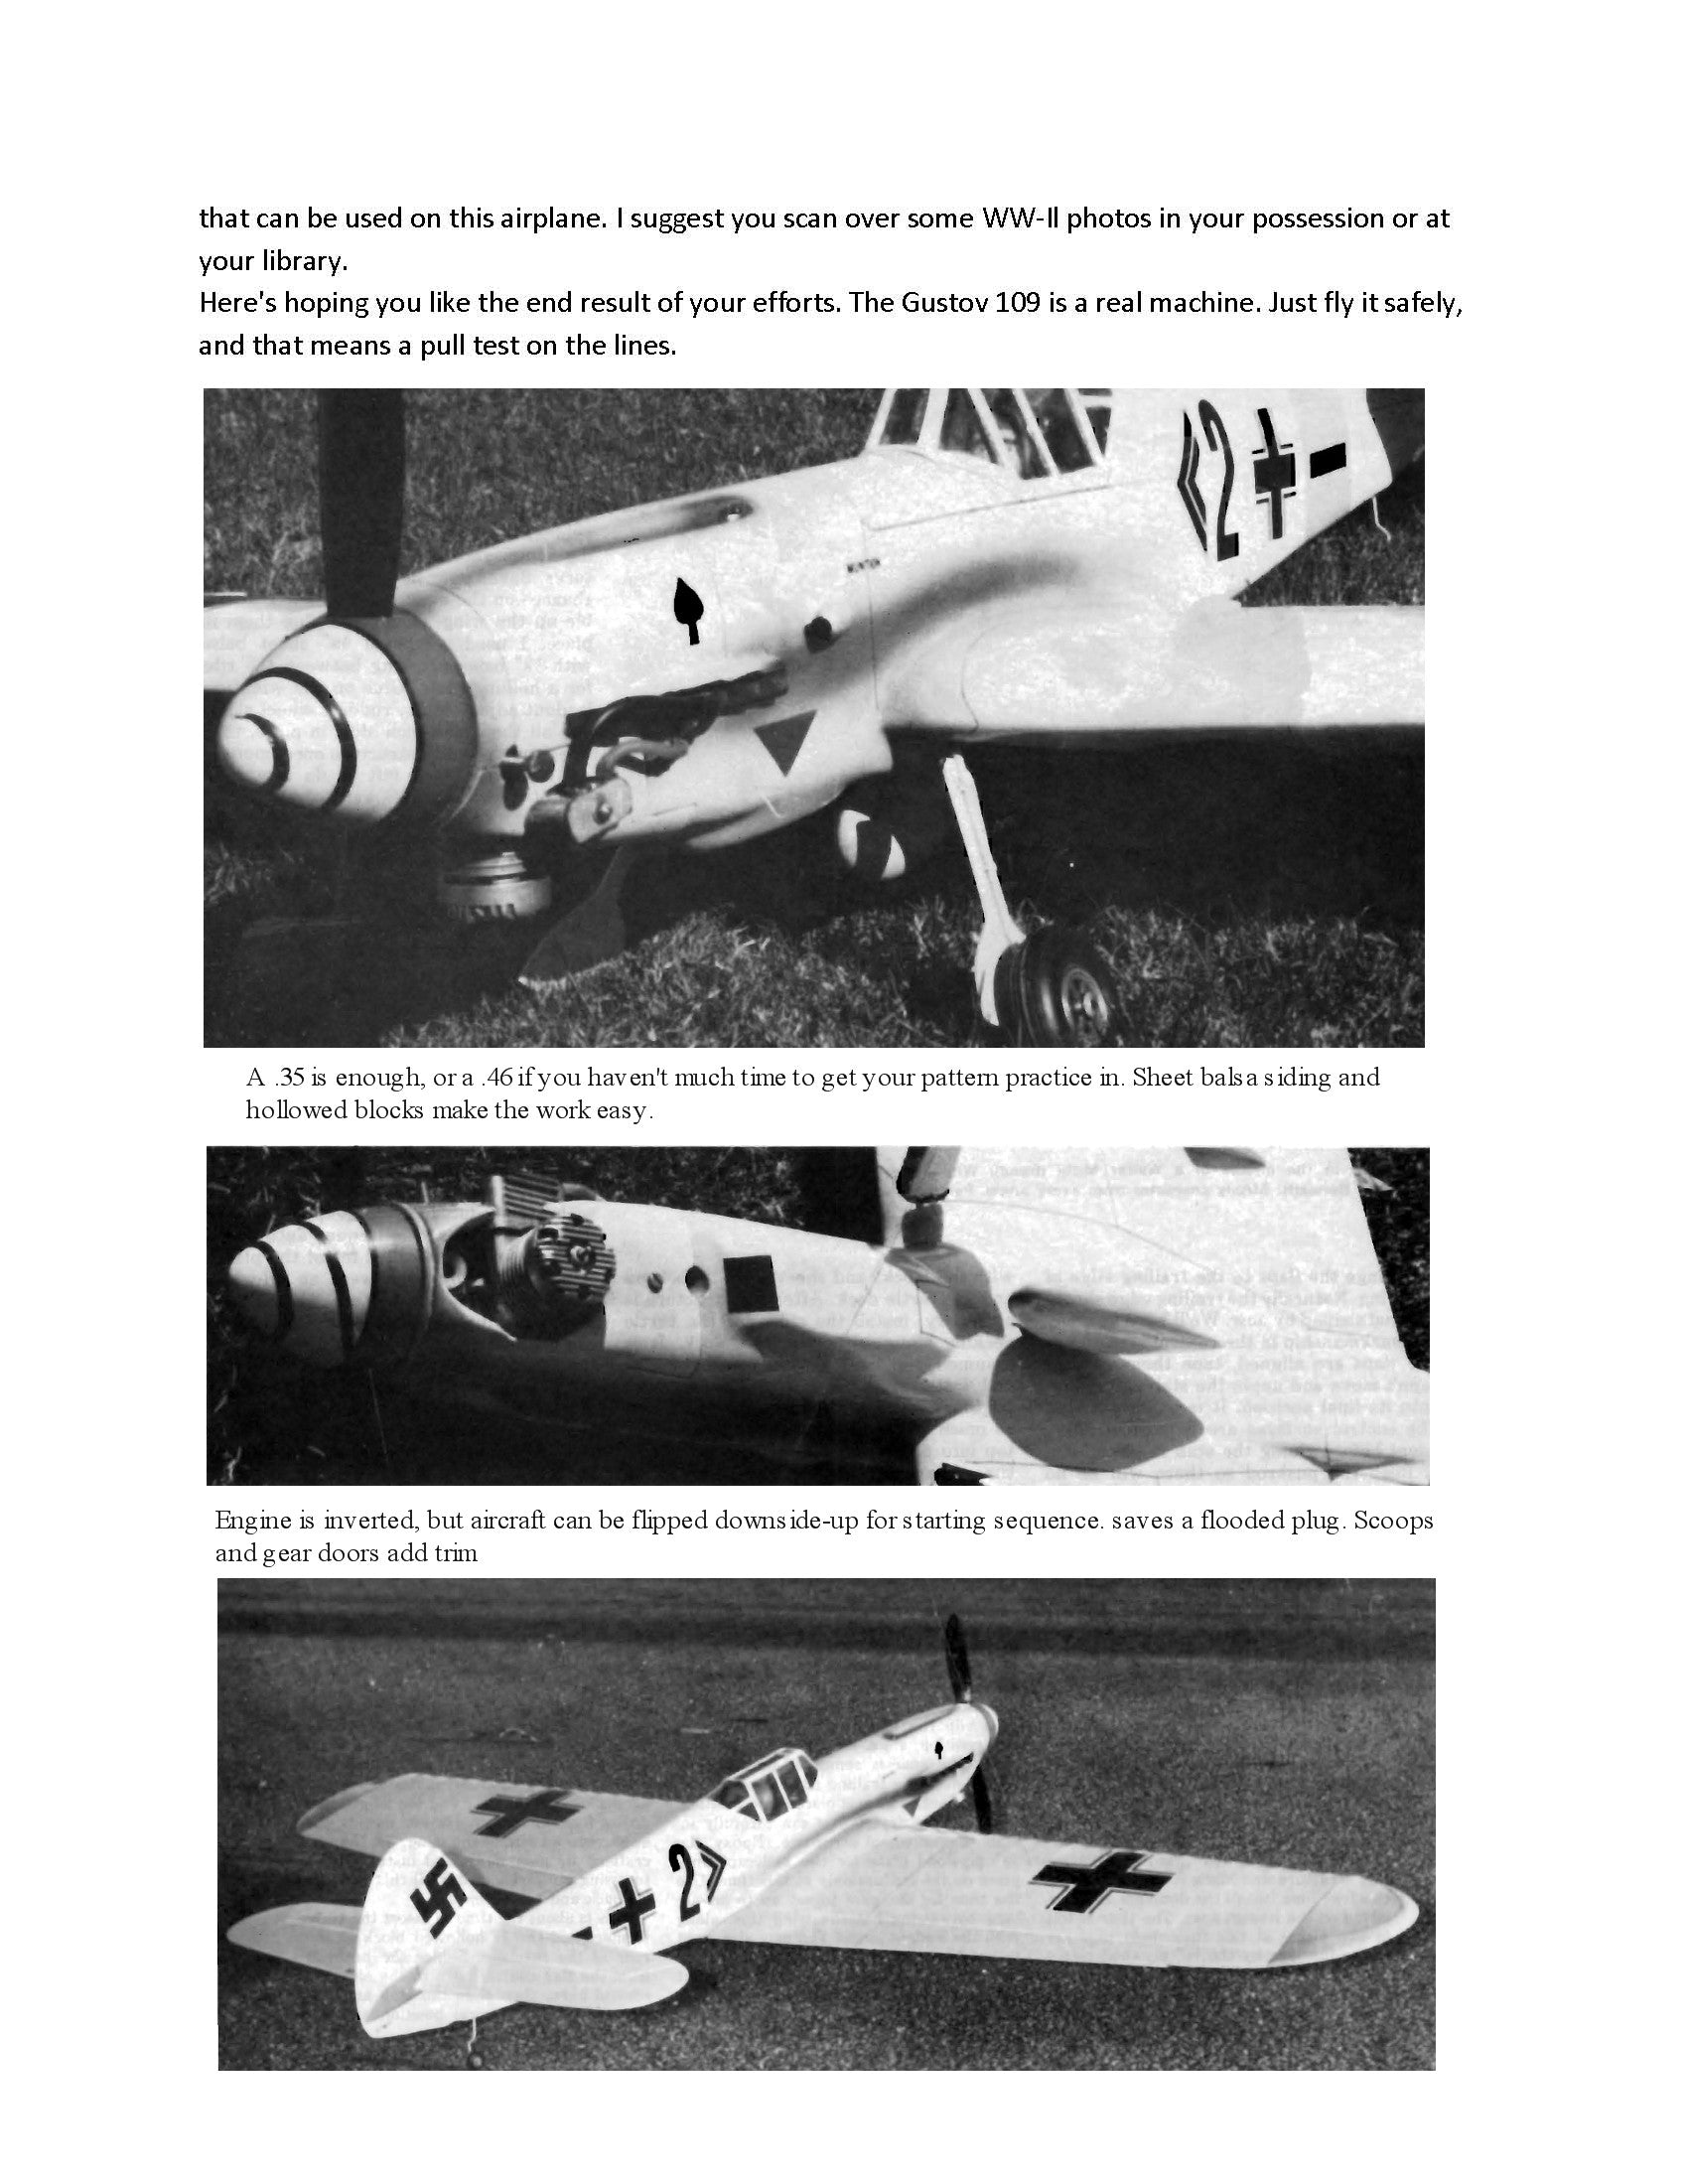 full size printed plans vintagee 1977 control line stunter “me 109-g” captures the realism of a ww ii